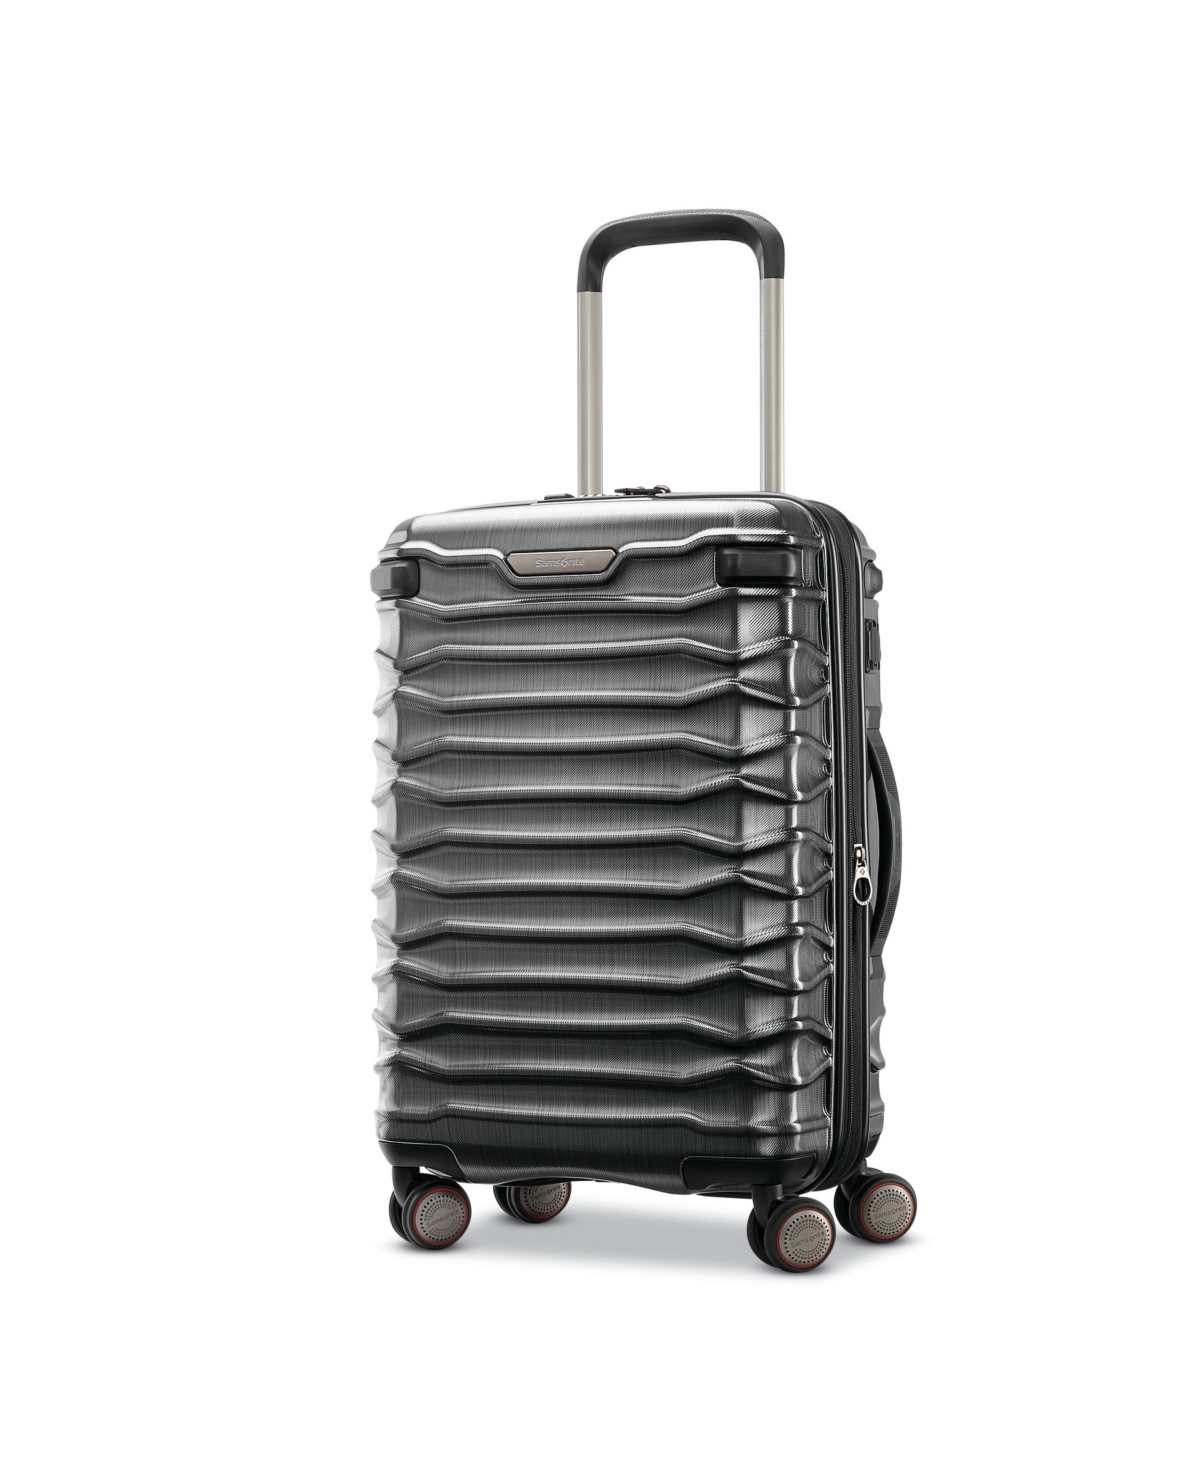 Samsonite Stryde 2 22" X 14" X 9" Carry-on In Brushed Graphite